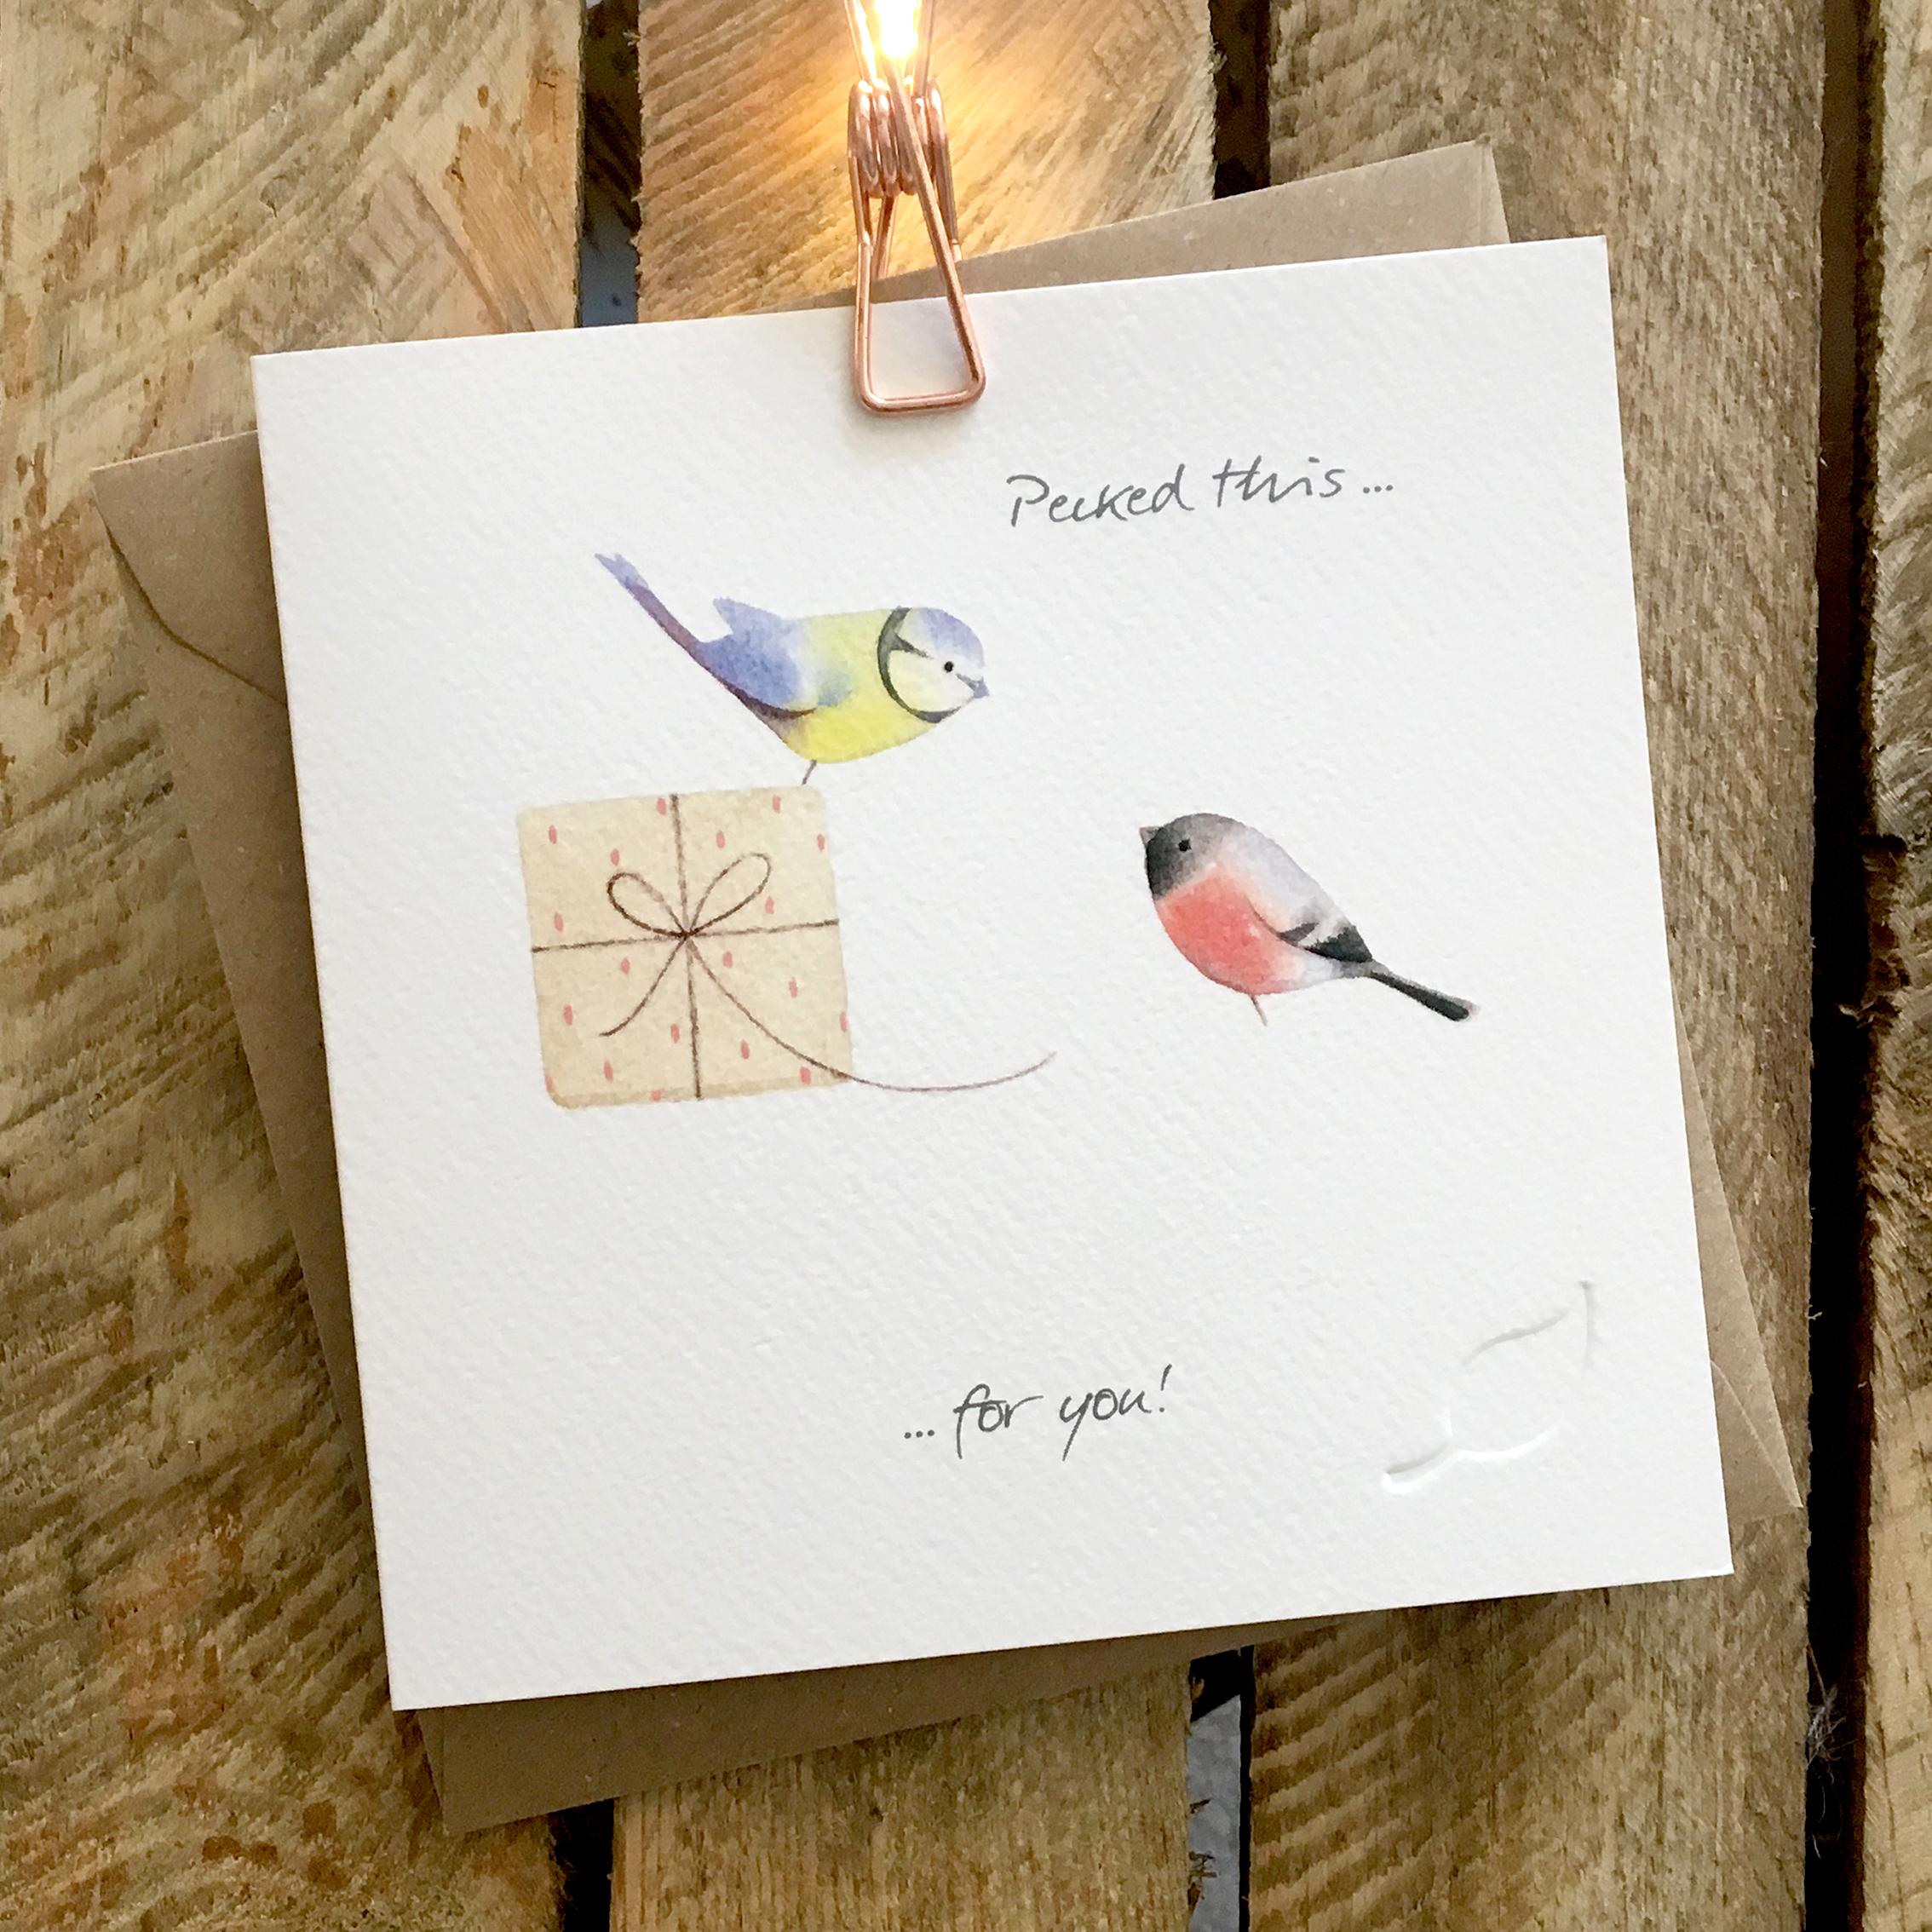 Card featuring two cute little birds - blue tit and a finch